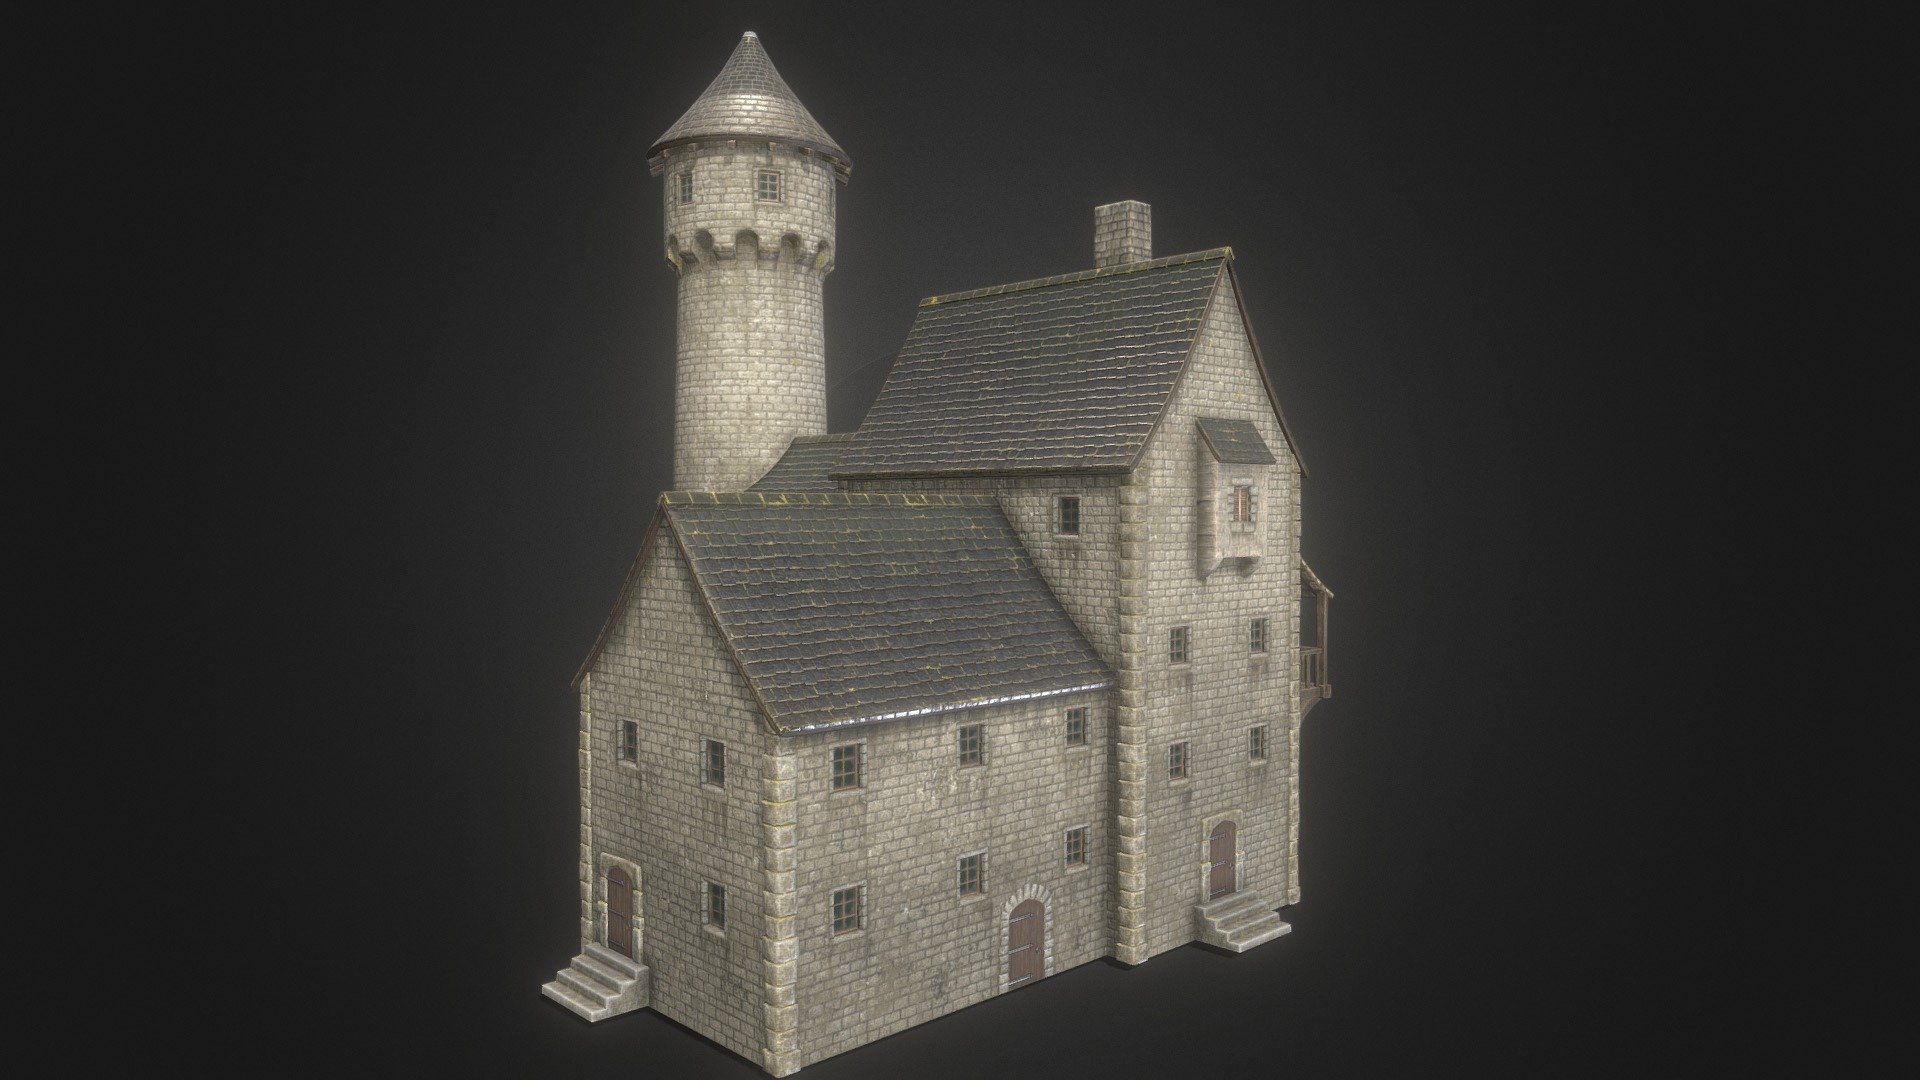 Fictional old stone house

Made with Blender, Zbrush and Substance Painter - Old stone House - 3D model by Weren 3d model